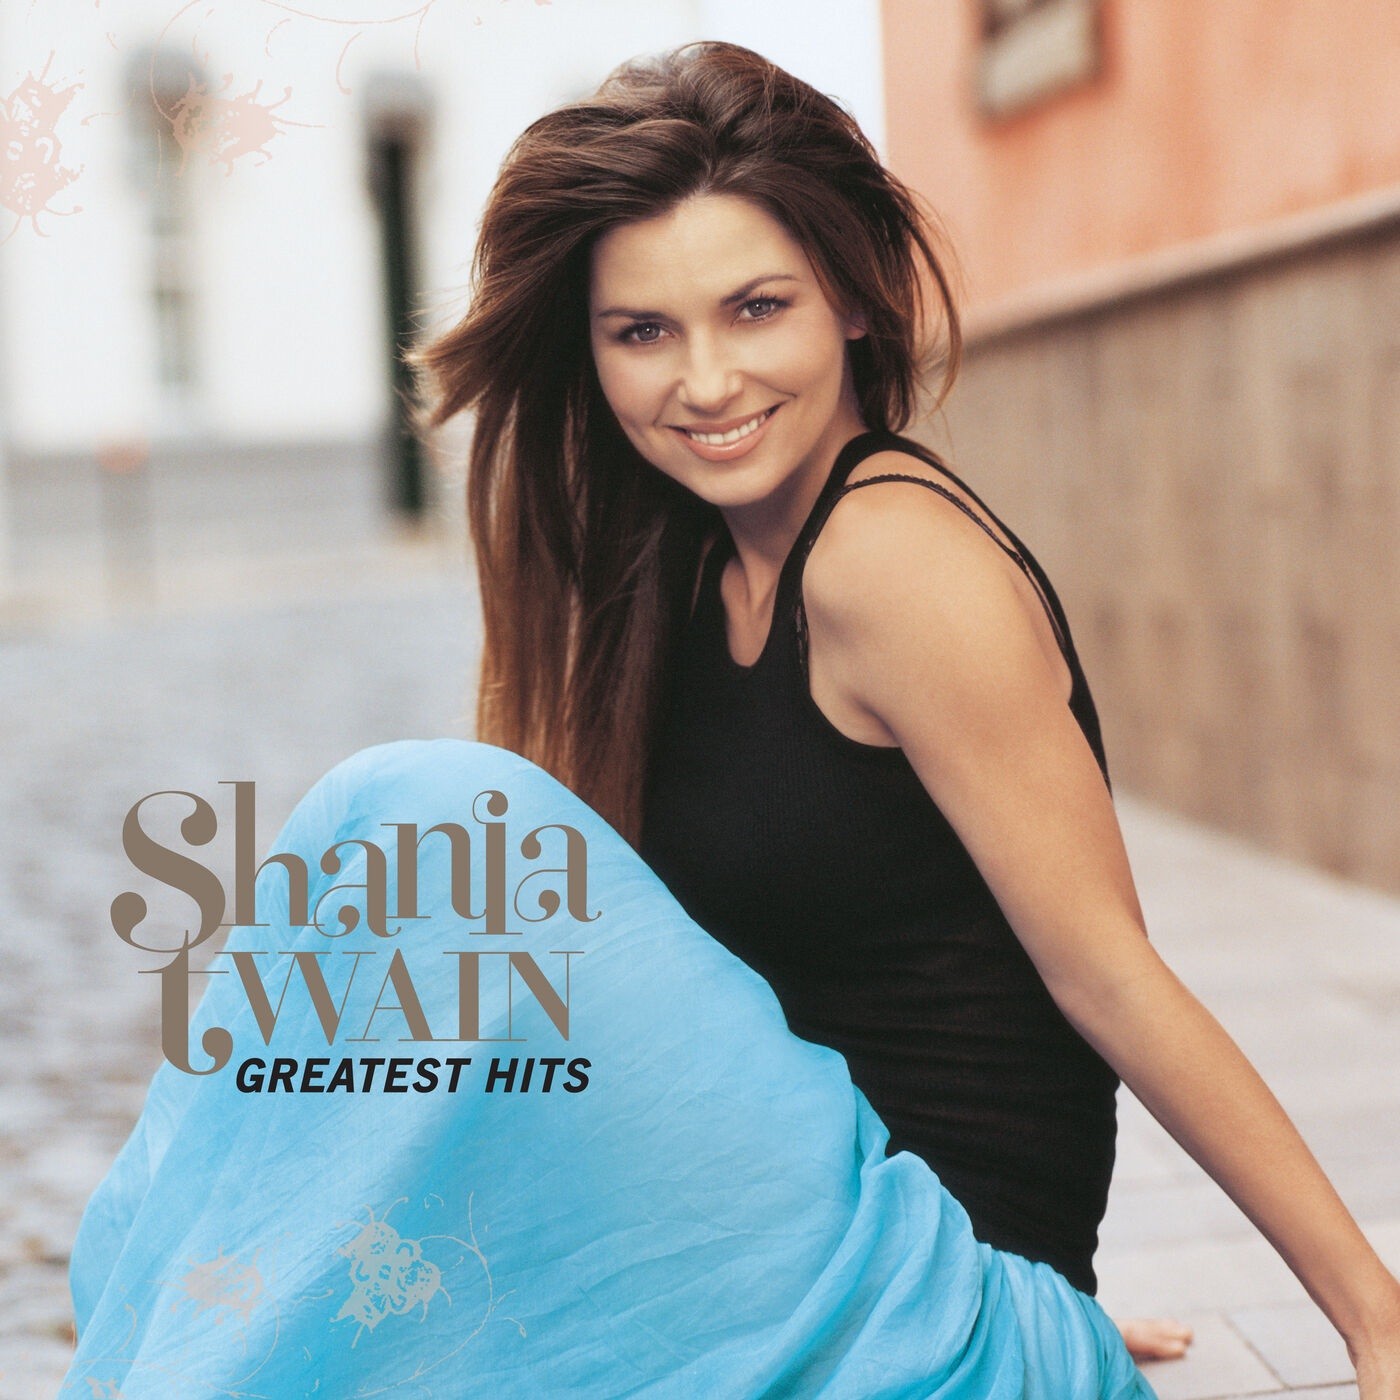 Shania Twain - Greatest Hits (Deluxe Edition) (2004/2023) [FLAC 24bit/96kHz] Download